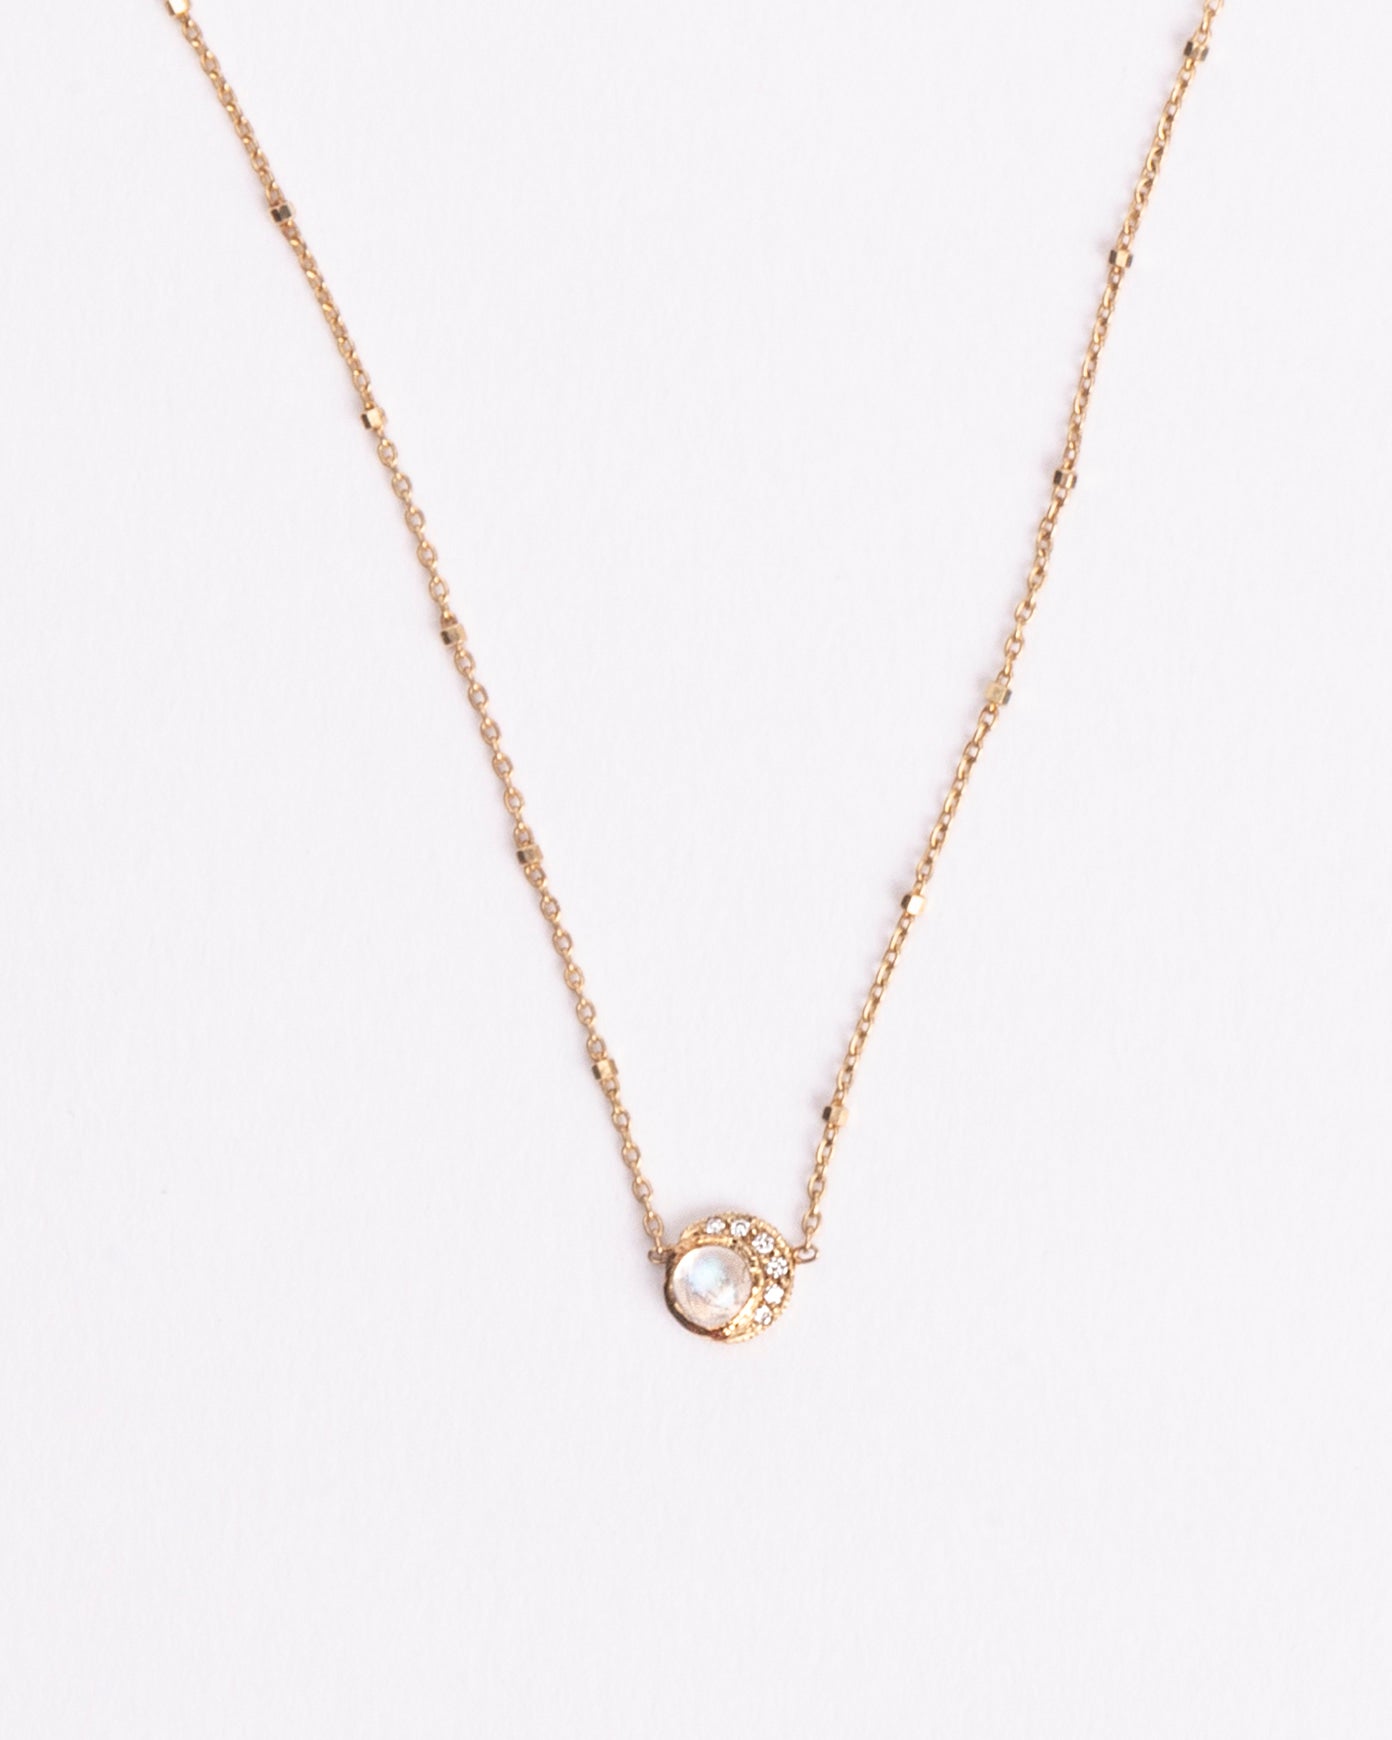 BABY MOON NECKLACE